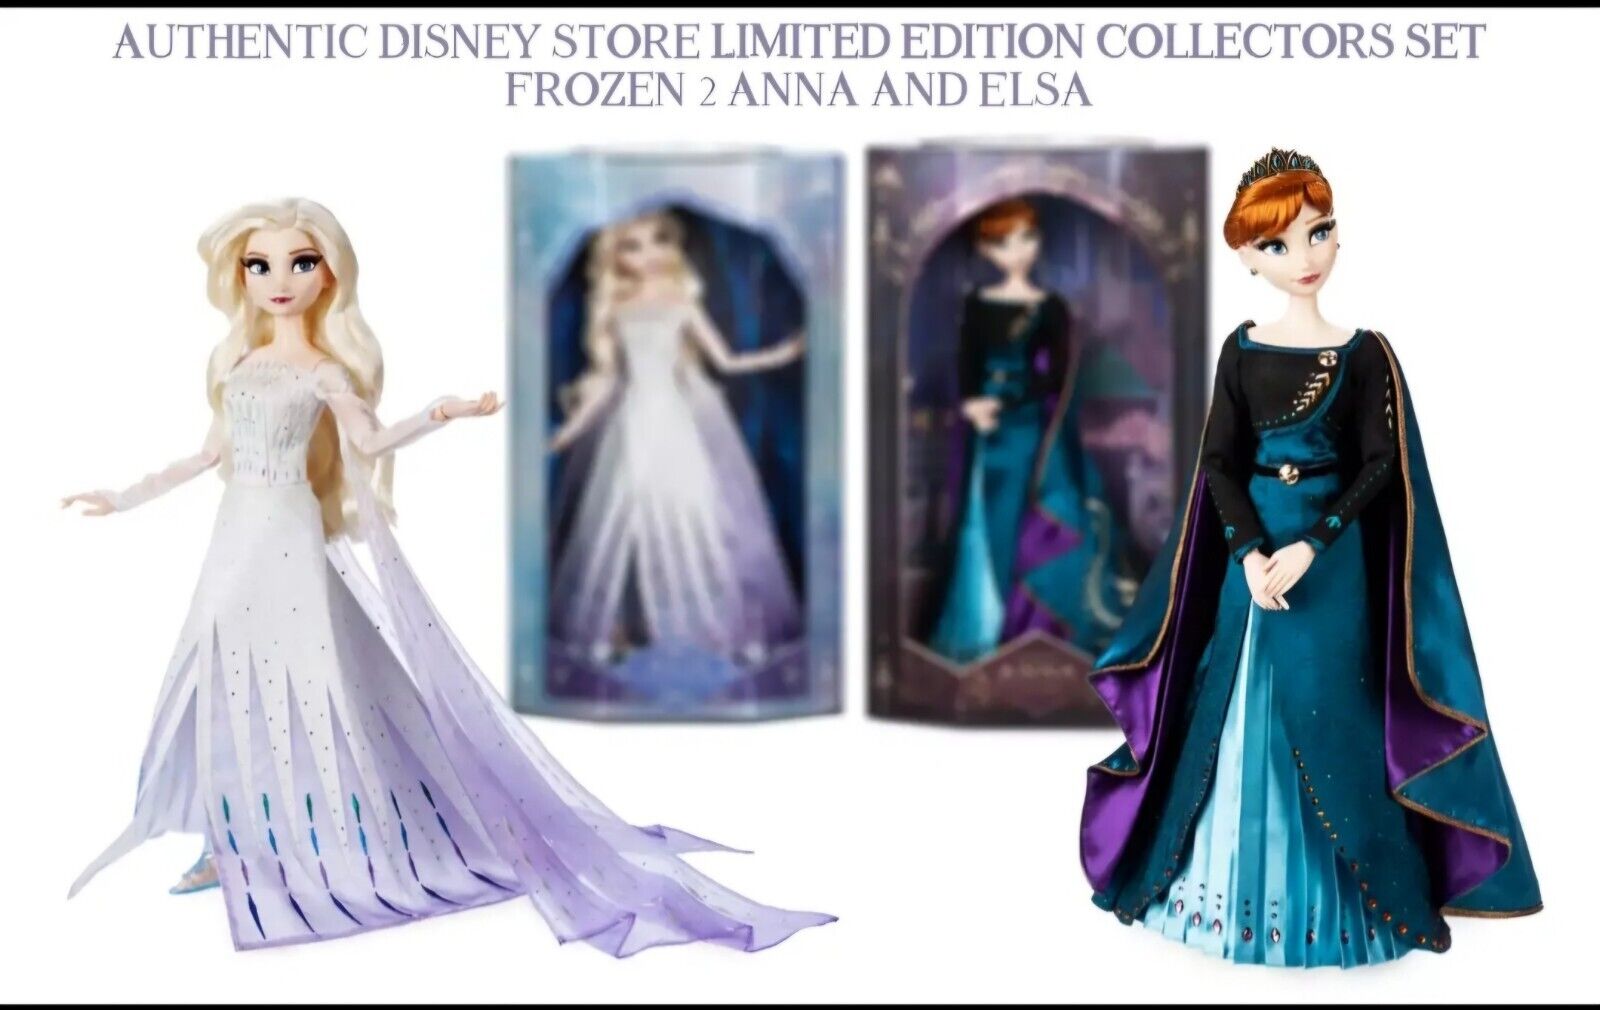 Disney Store Frozen II Queen Anna and Elsa Limited Edition Dolls.